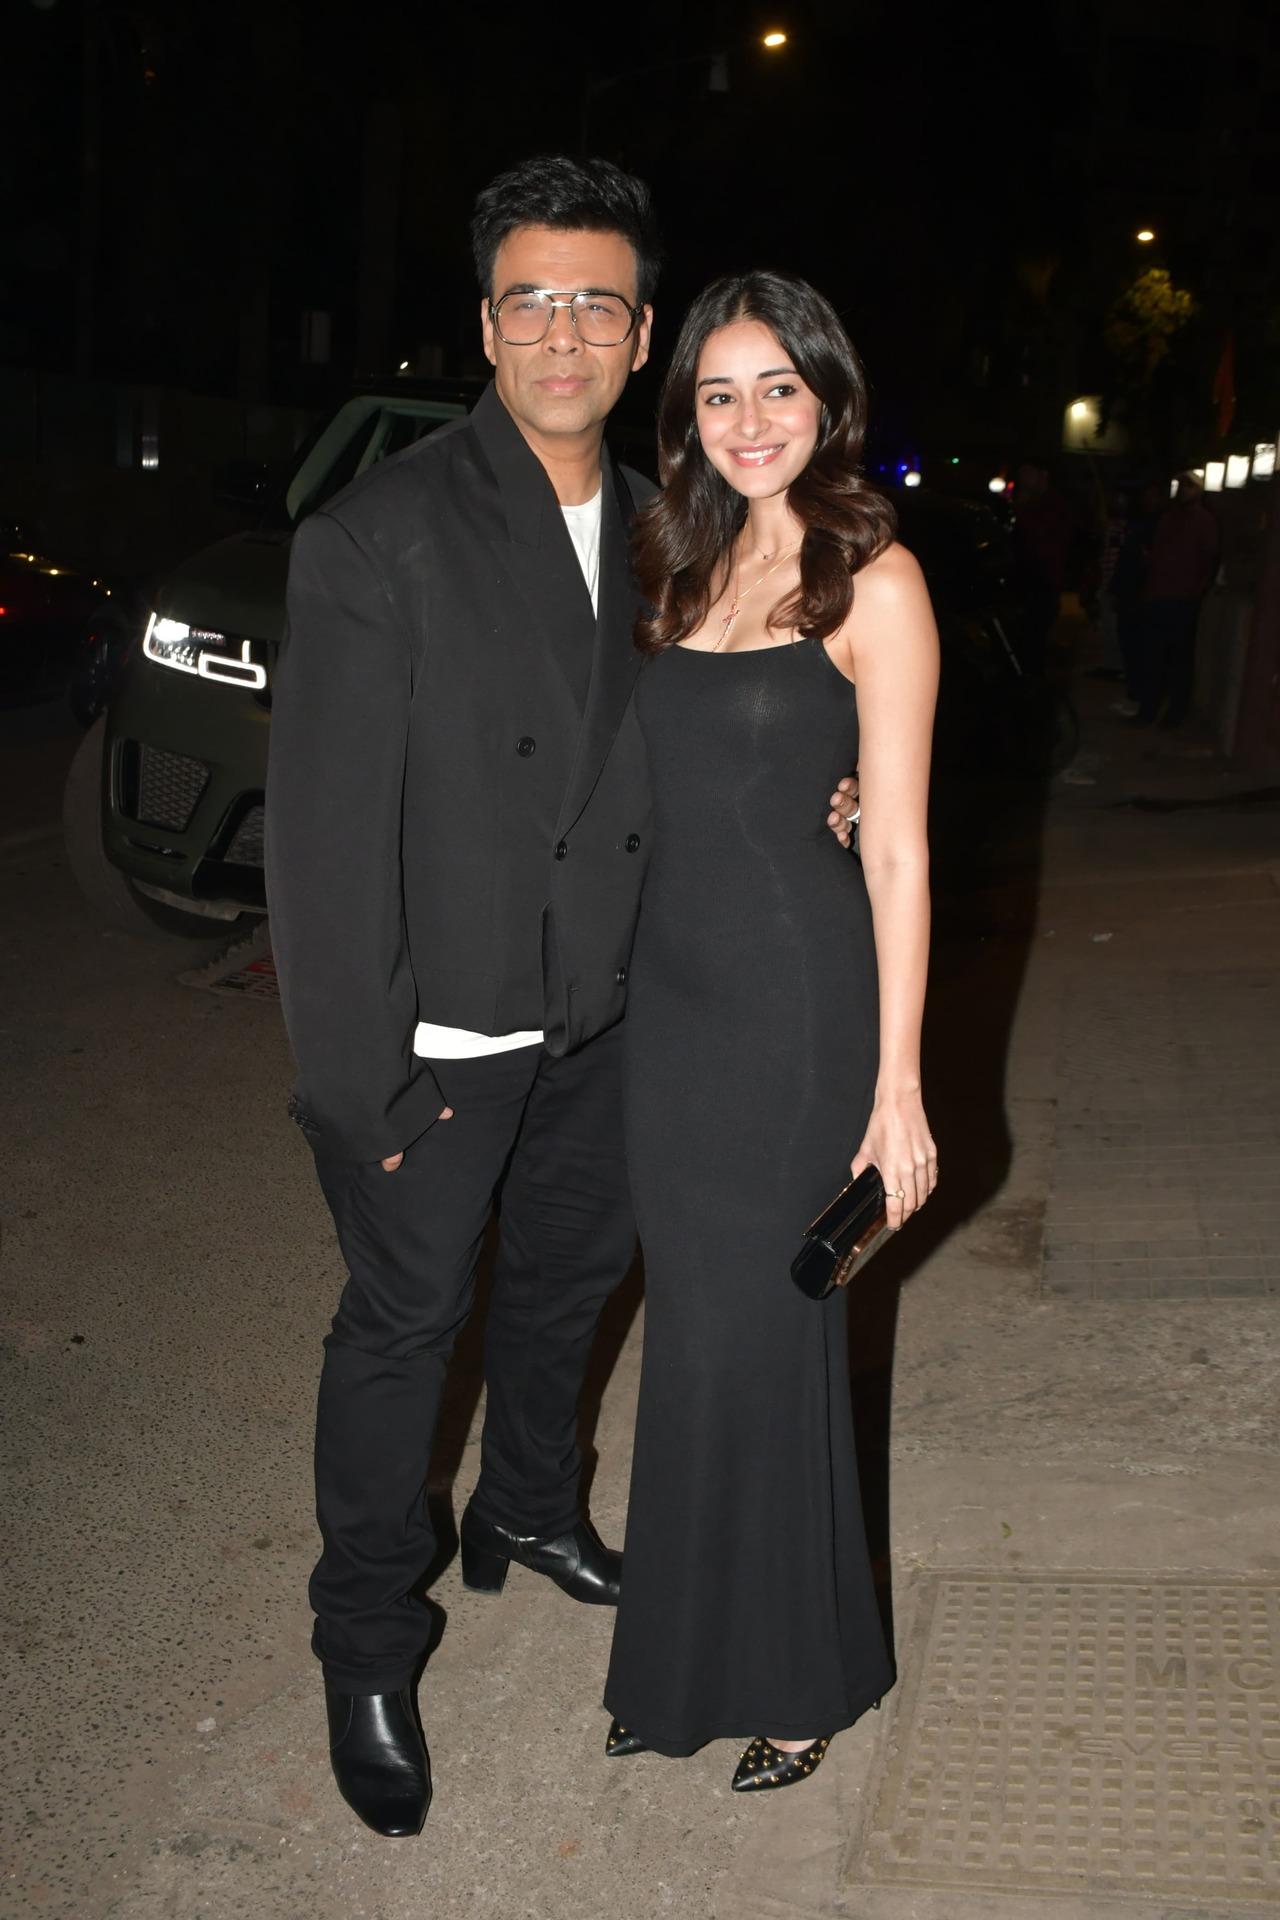 Karan Johar and Ananya Panday twin in black and pose together for the paparazzi